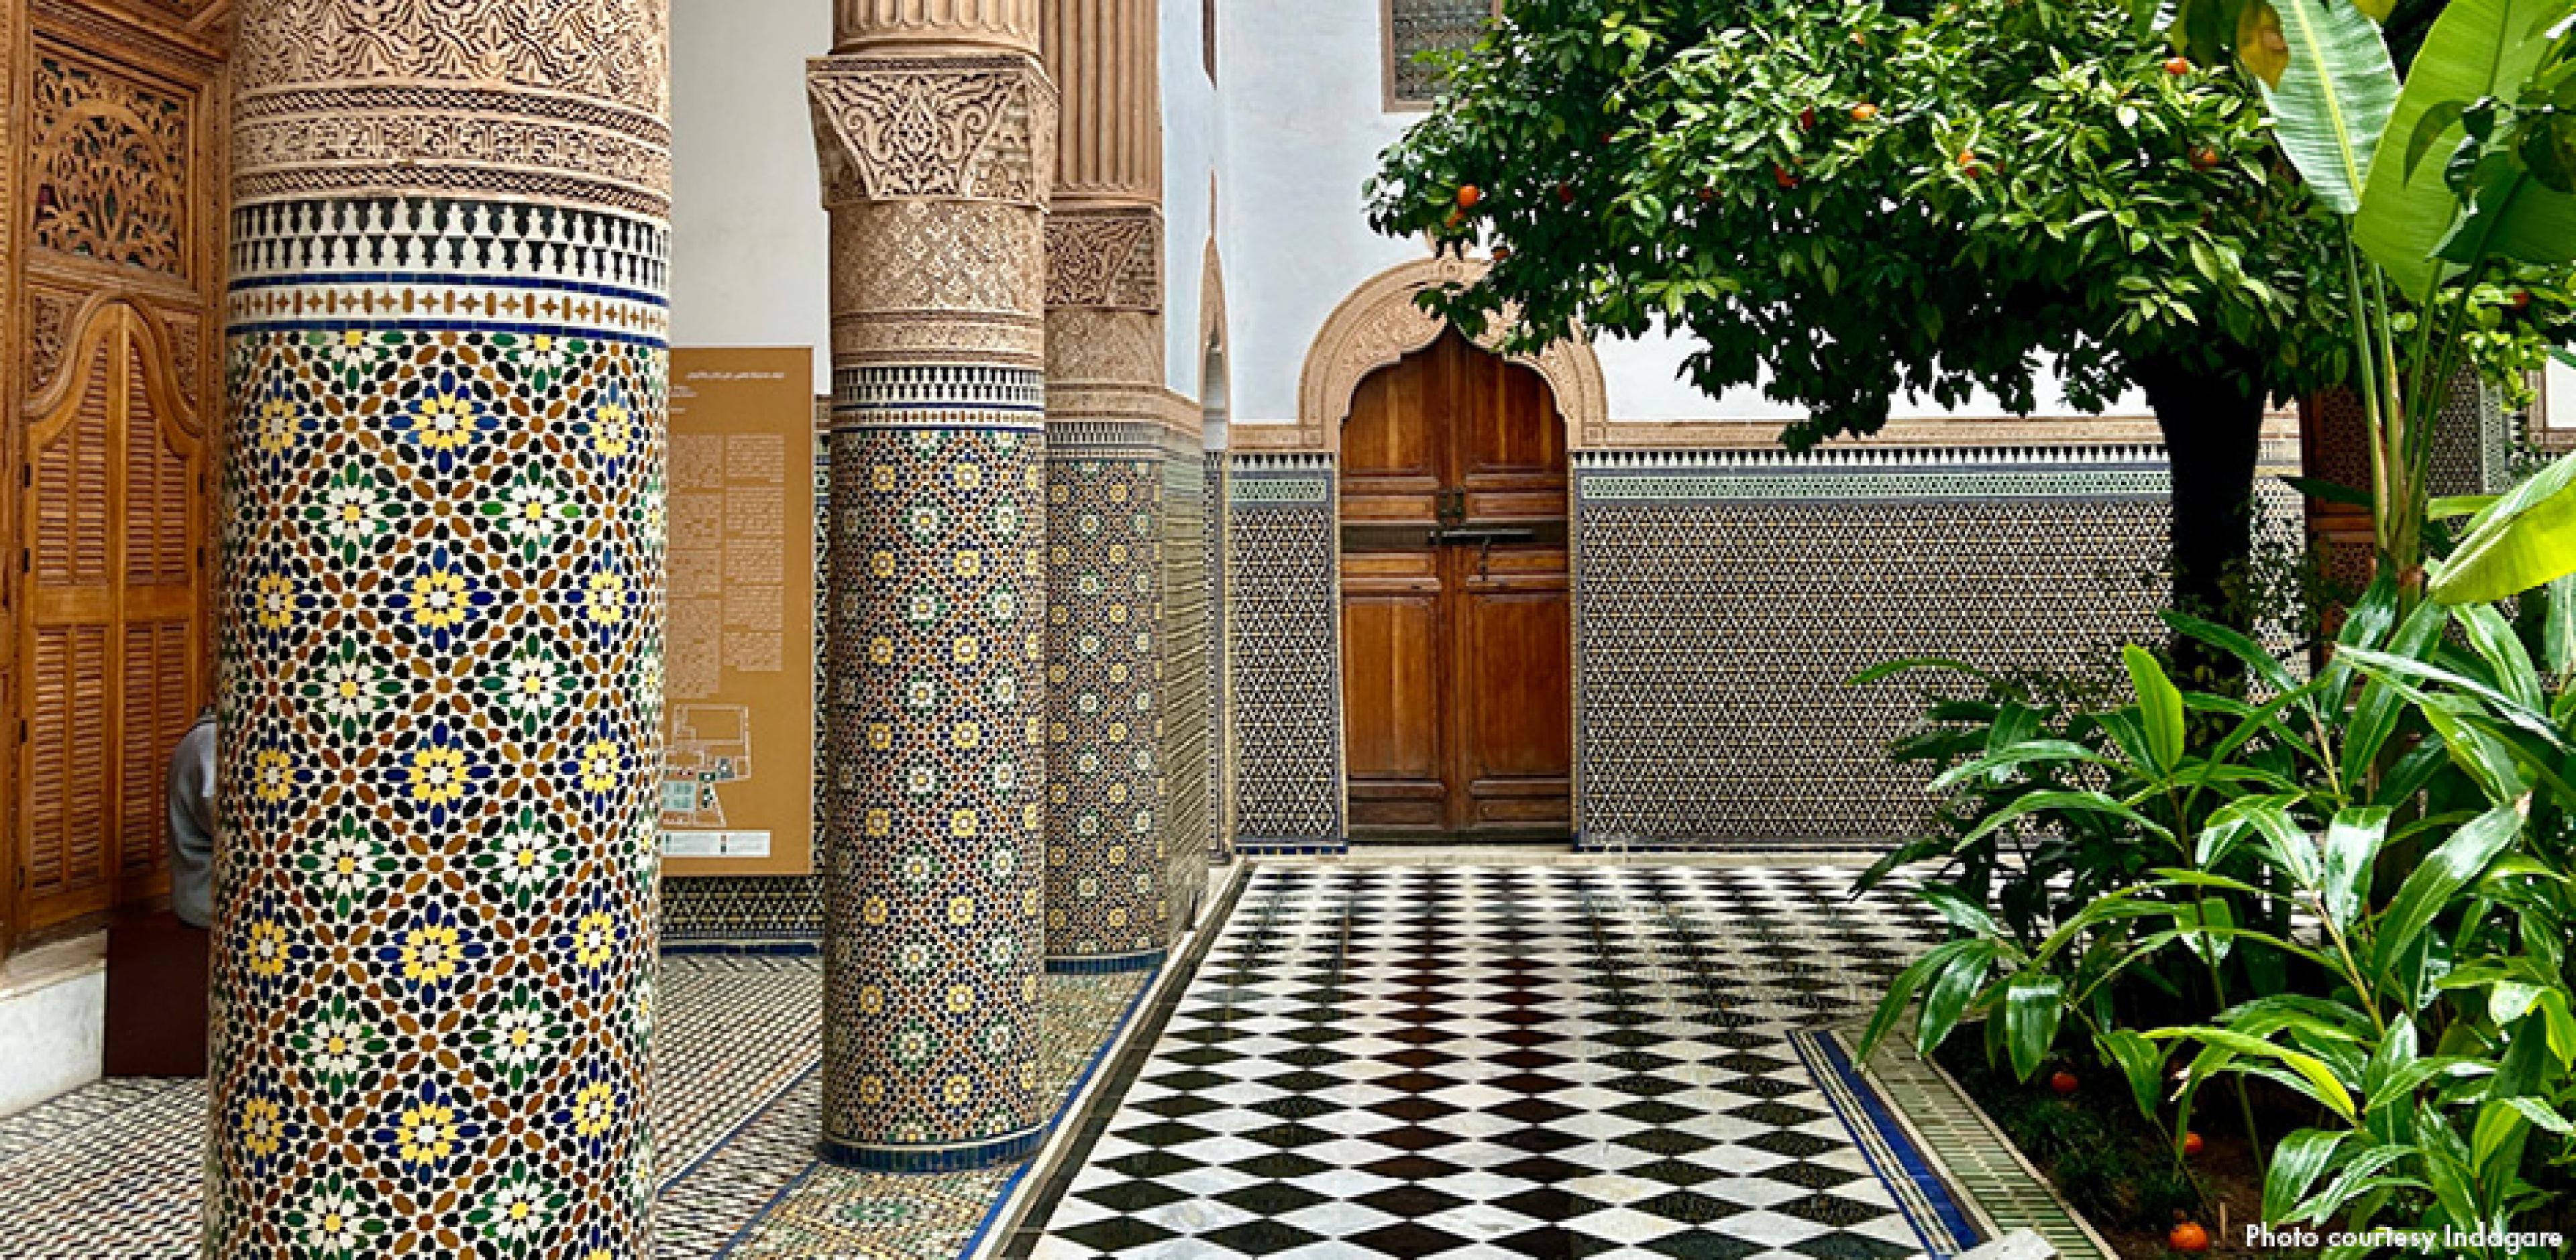 tiles in Marrakech, black and white on ground and colorful on pillars